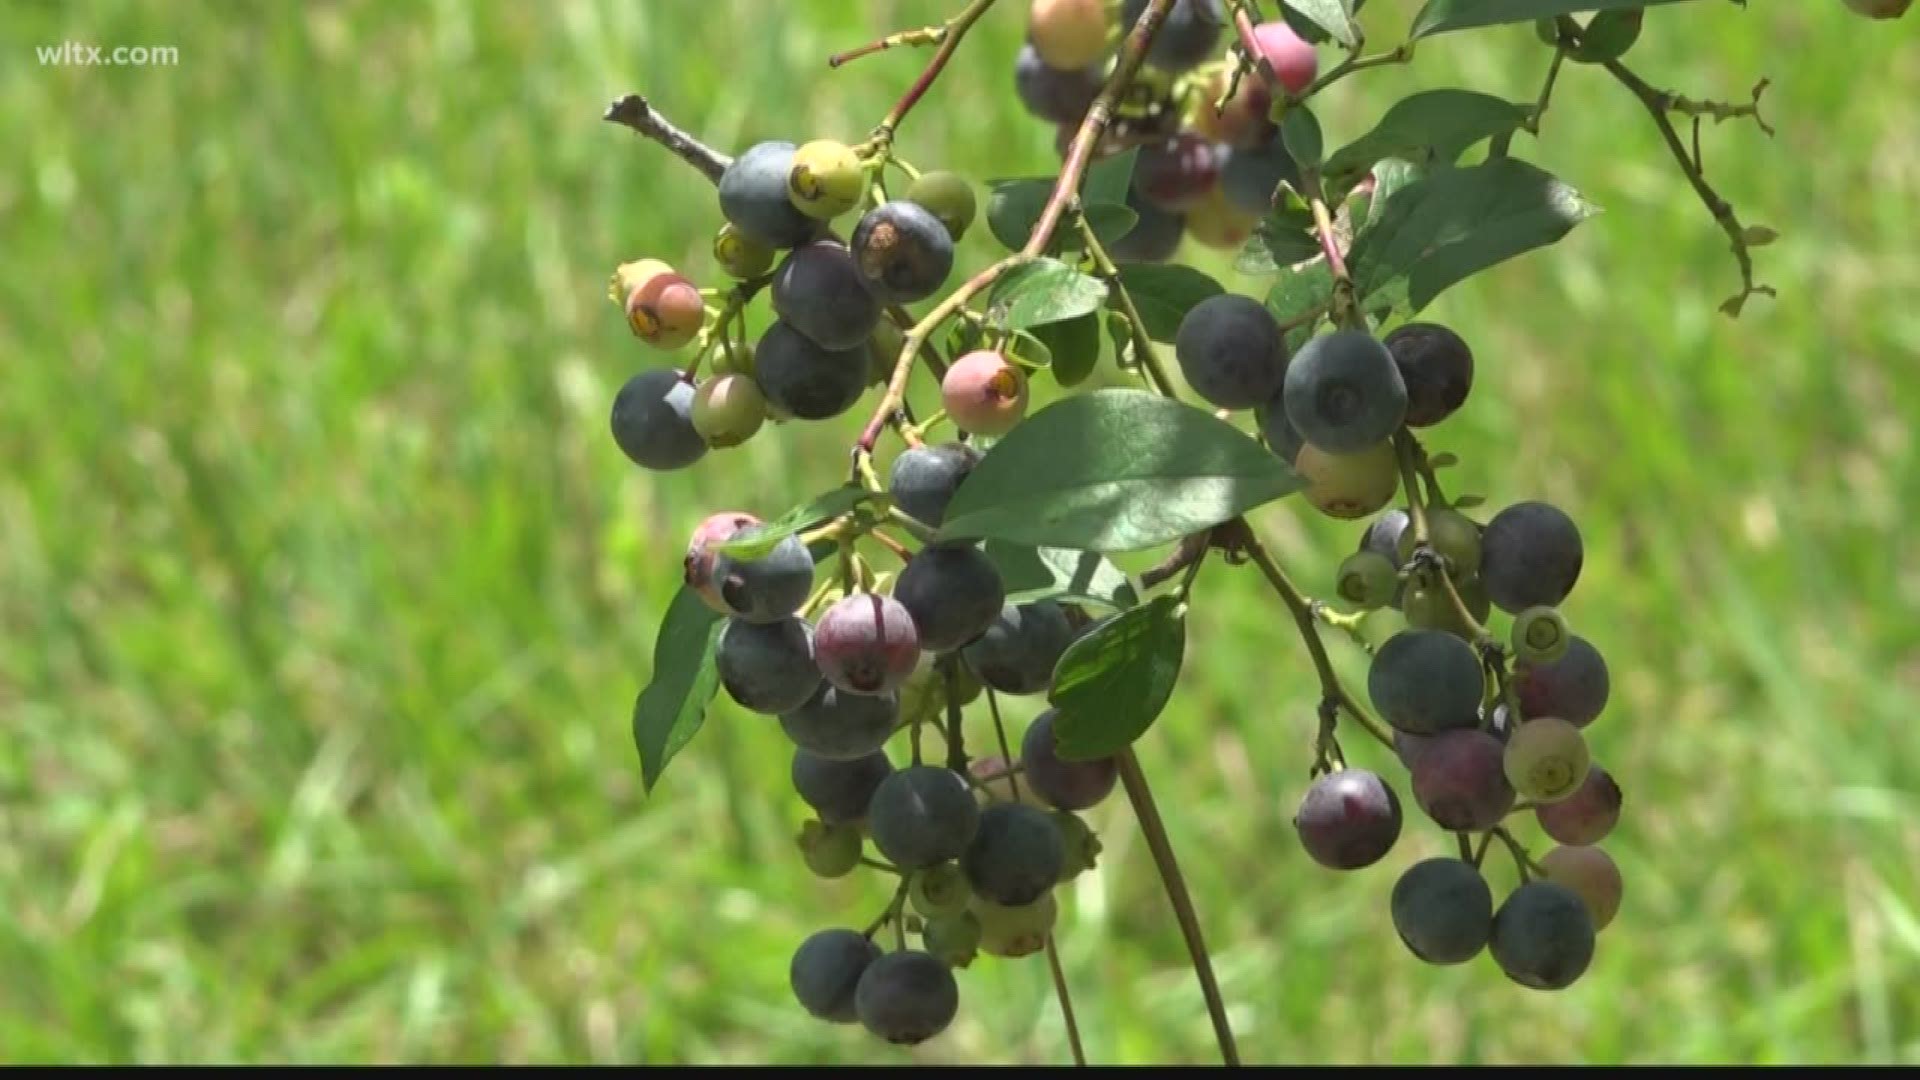 The blueberry farm is located outside of Wedgefield